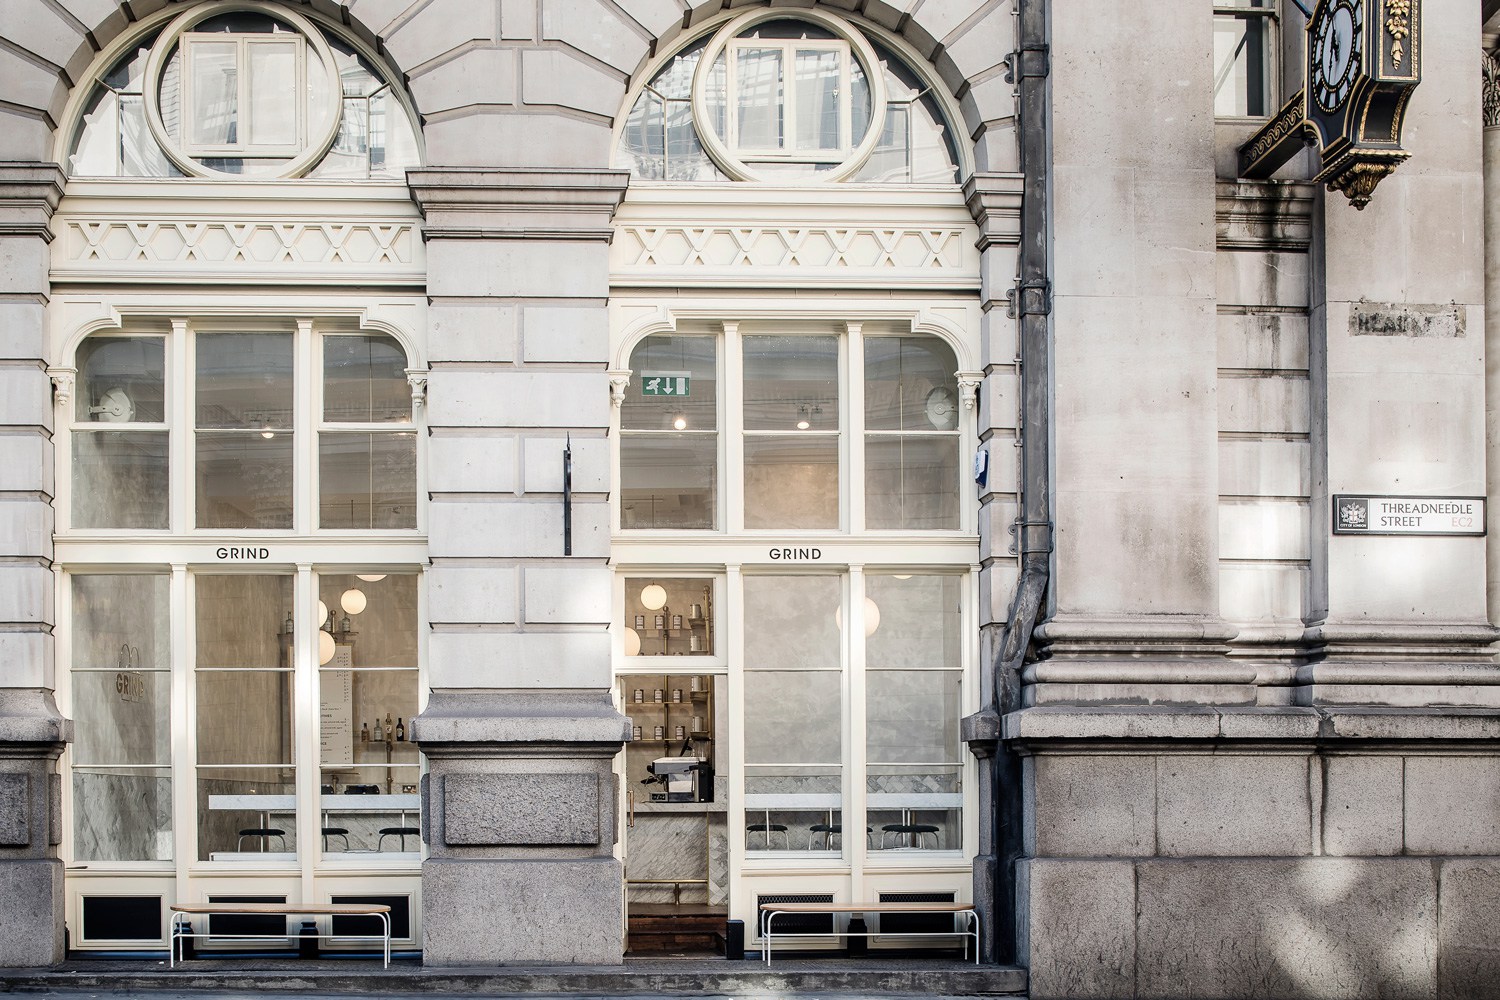 Places: The Royal Exchange Grind, London